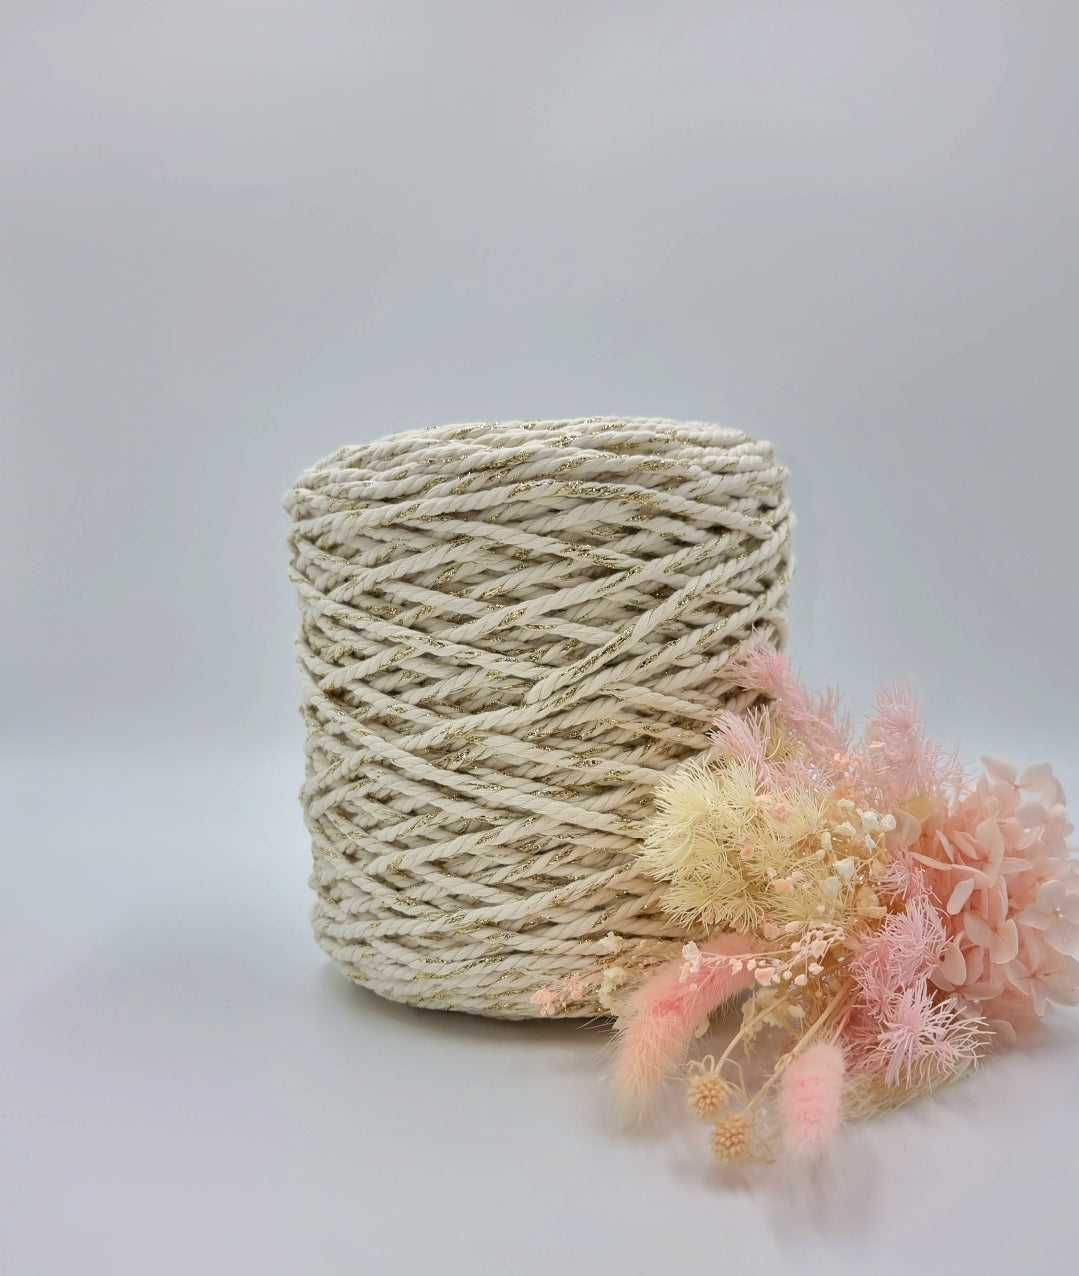 Natural Shiny Gold 3 Strand Macrame Cord - 3MM 3 Strand Luxe Cotton String 1KG Stardust Melbourne